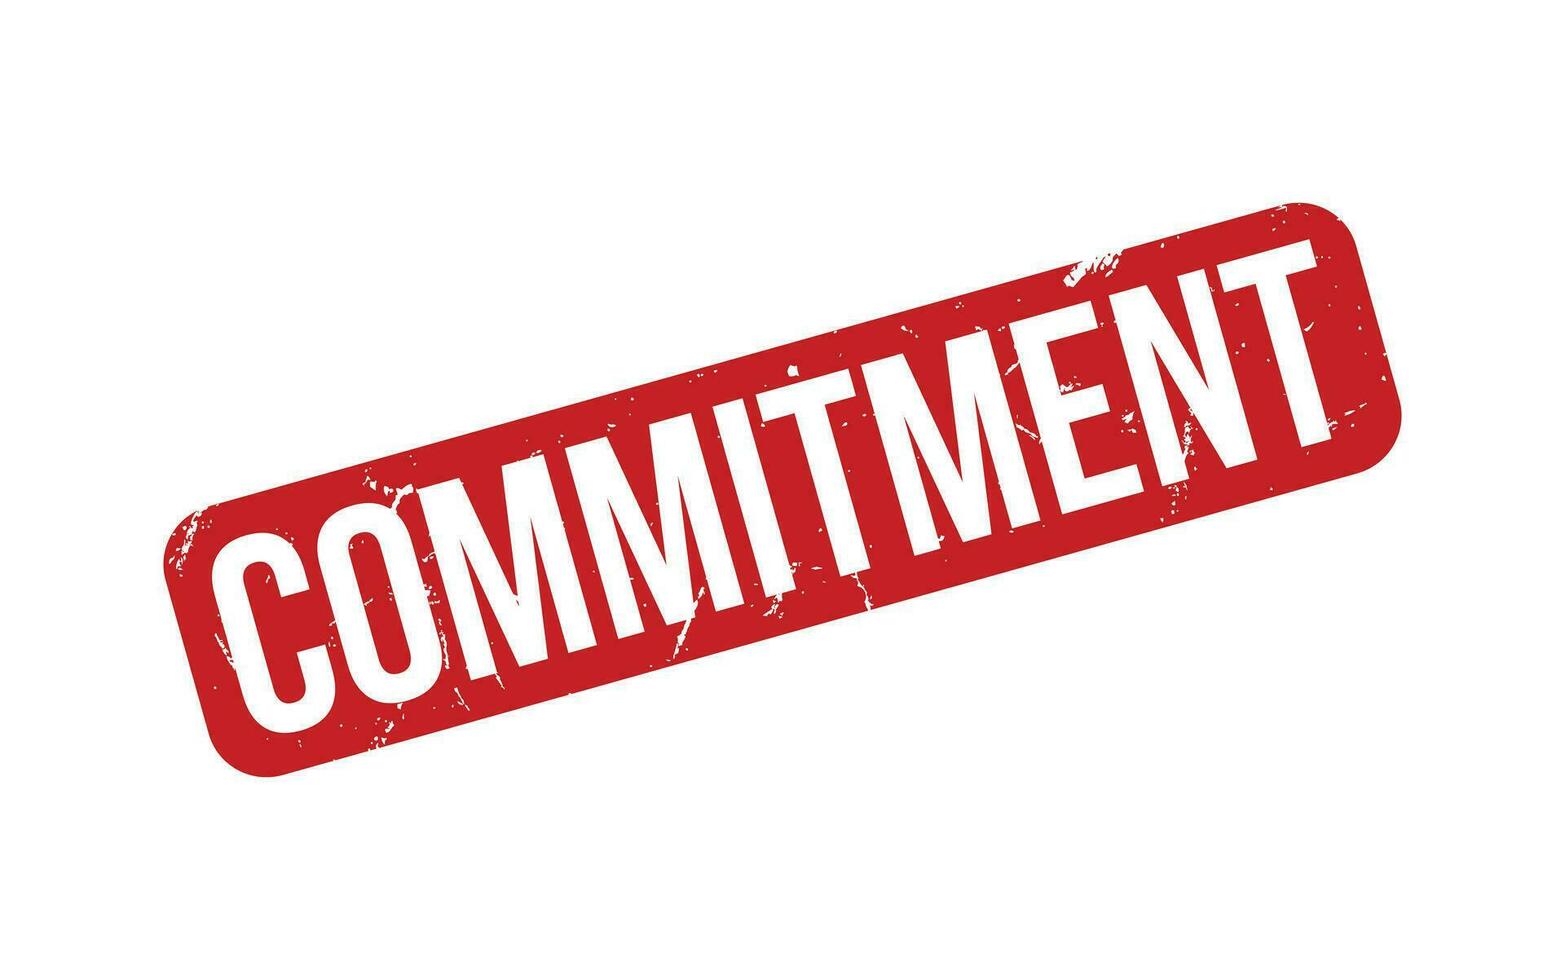 Commitment rubber grunge stamp seal vector